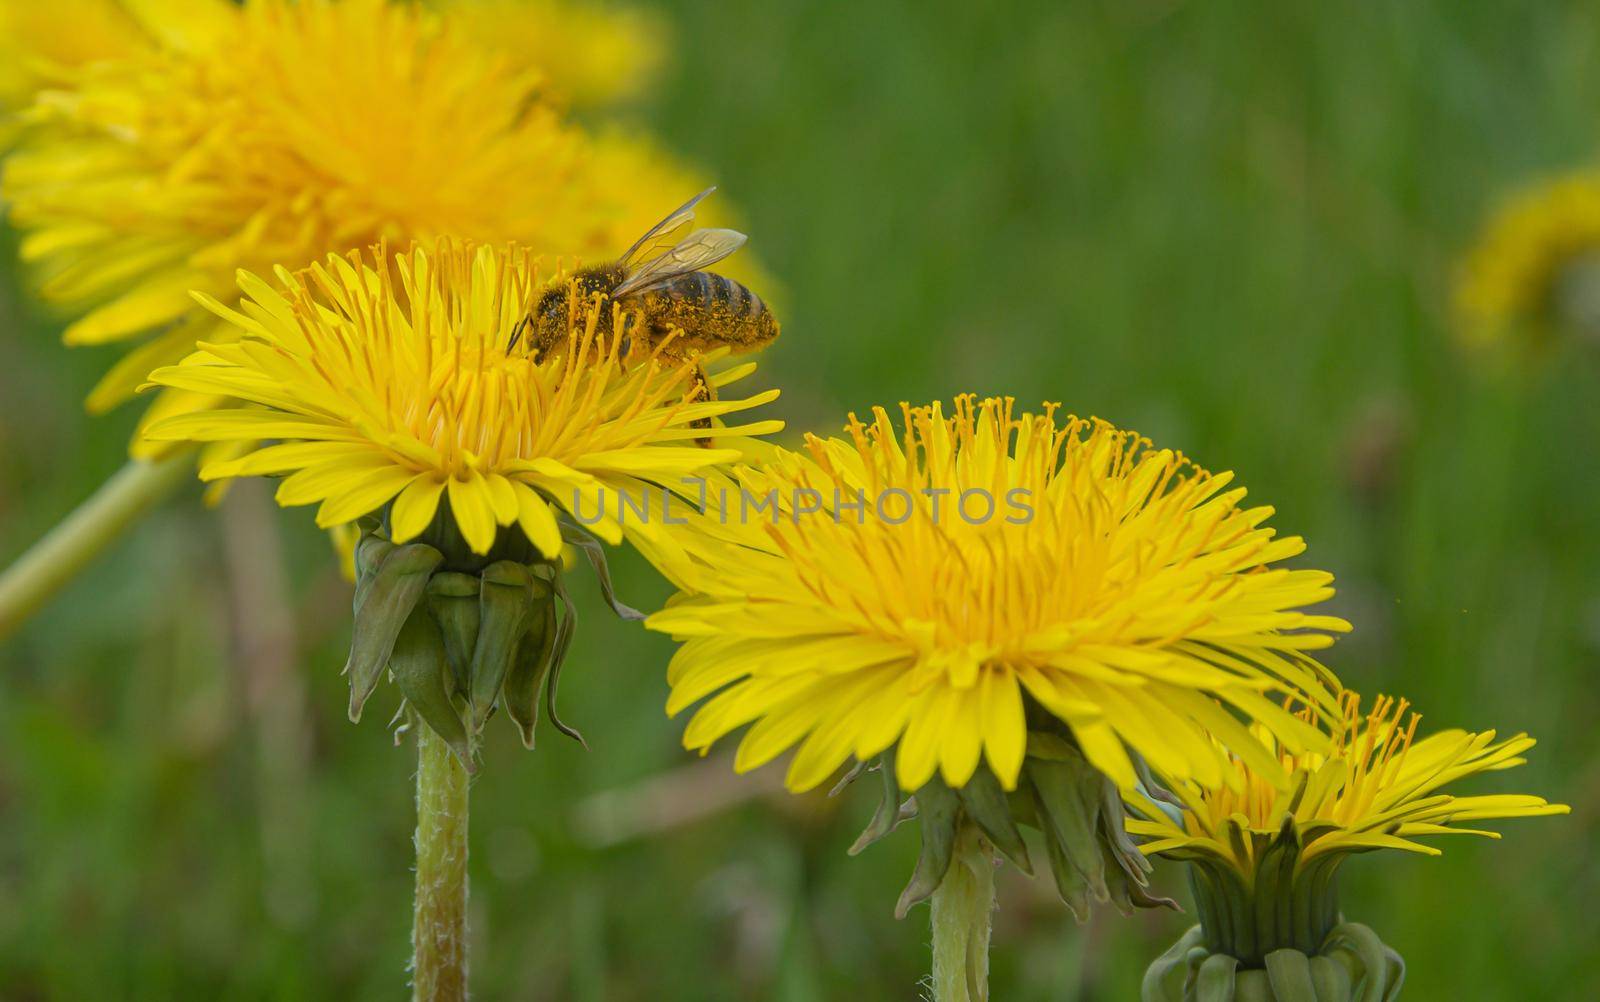 Bee on a yellow dandelion flower on a blurred background with bokeh elements. Stock photography.